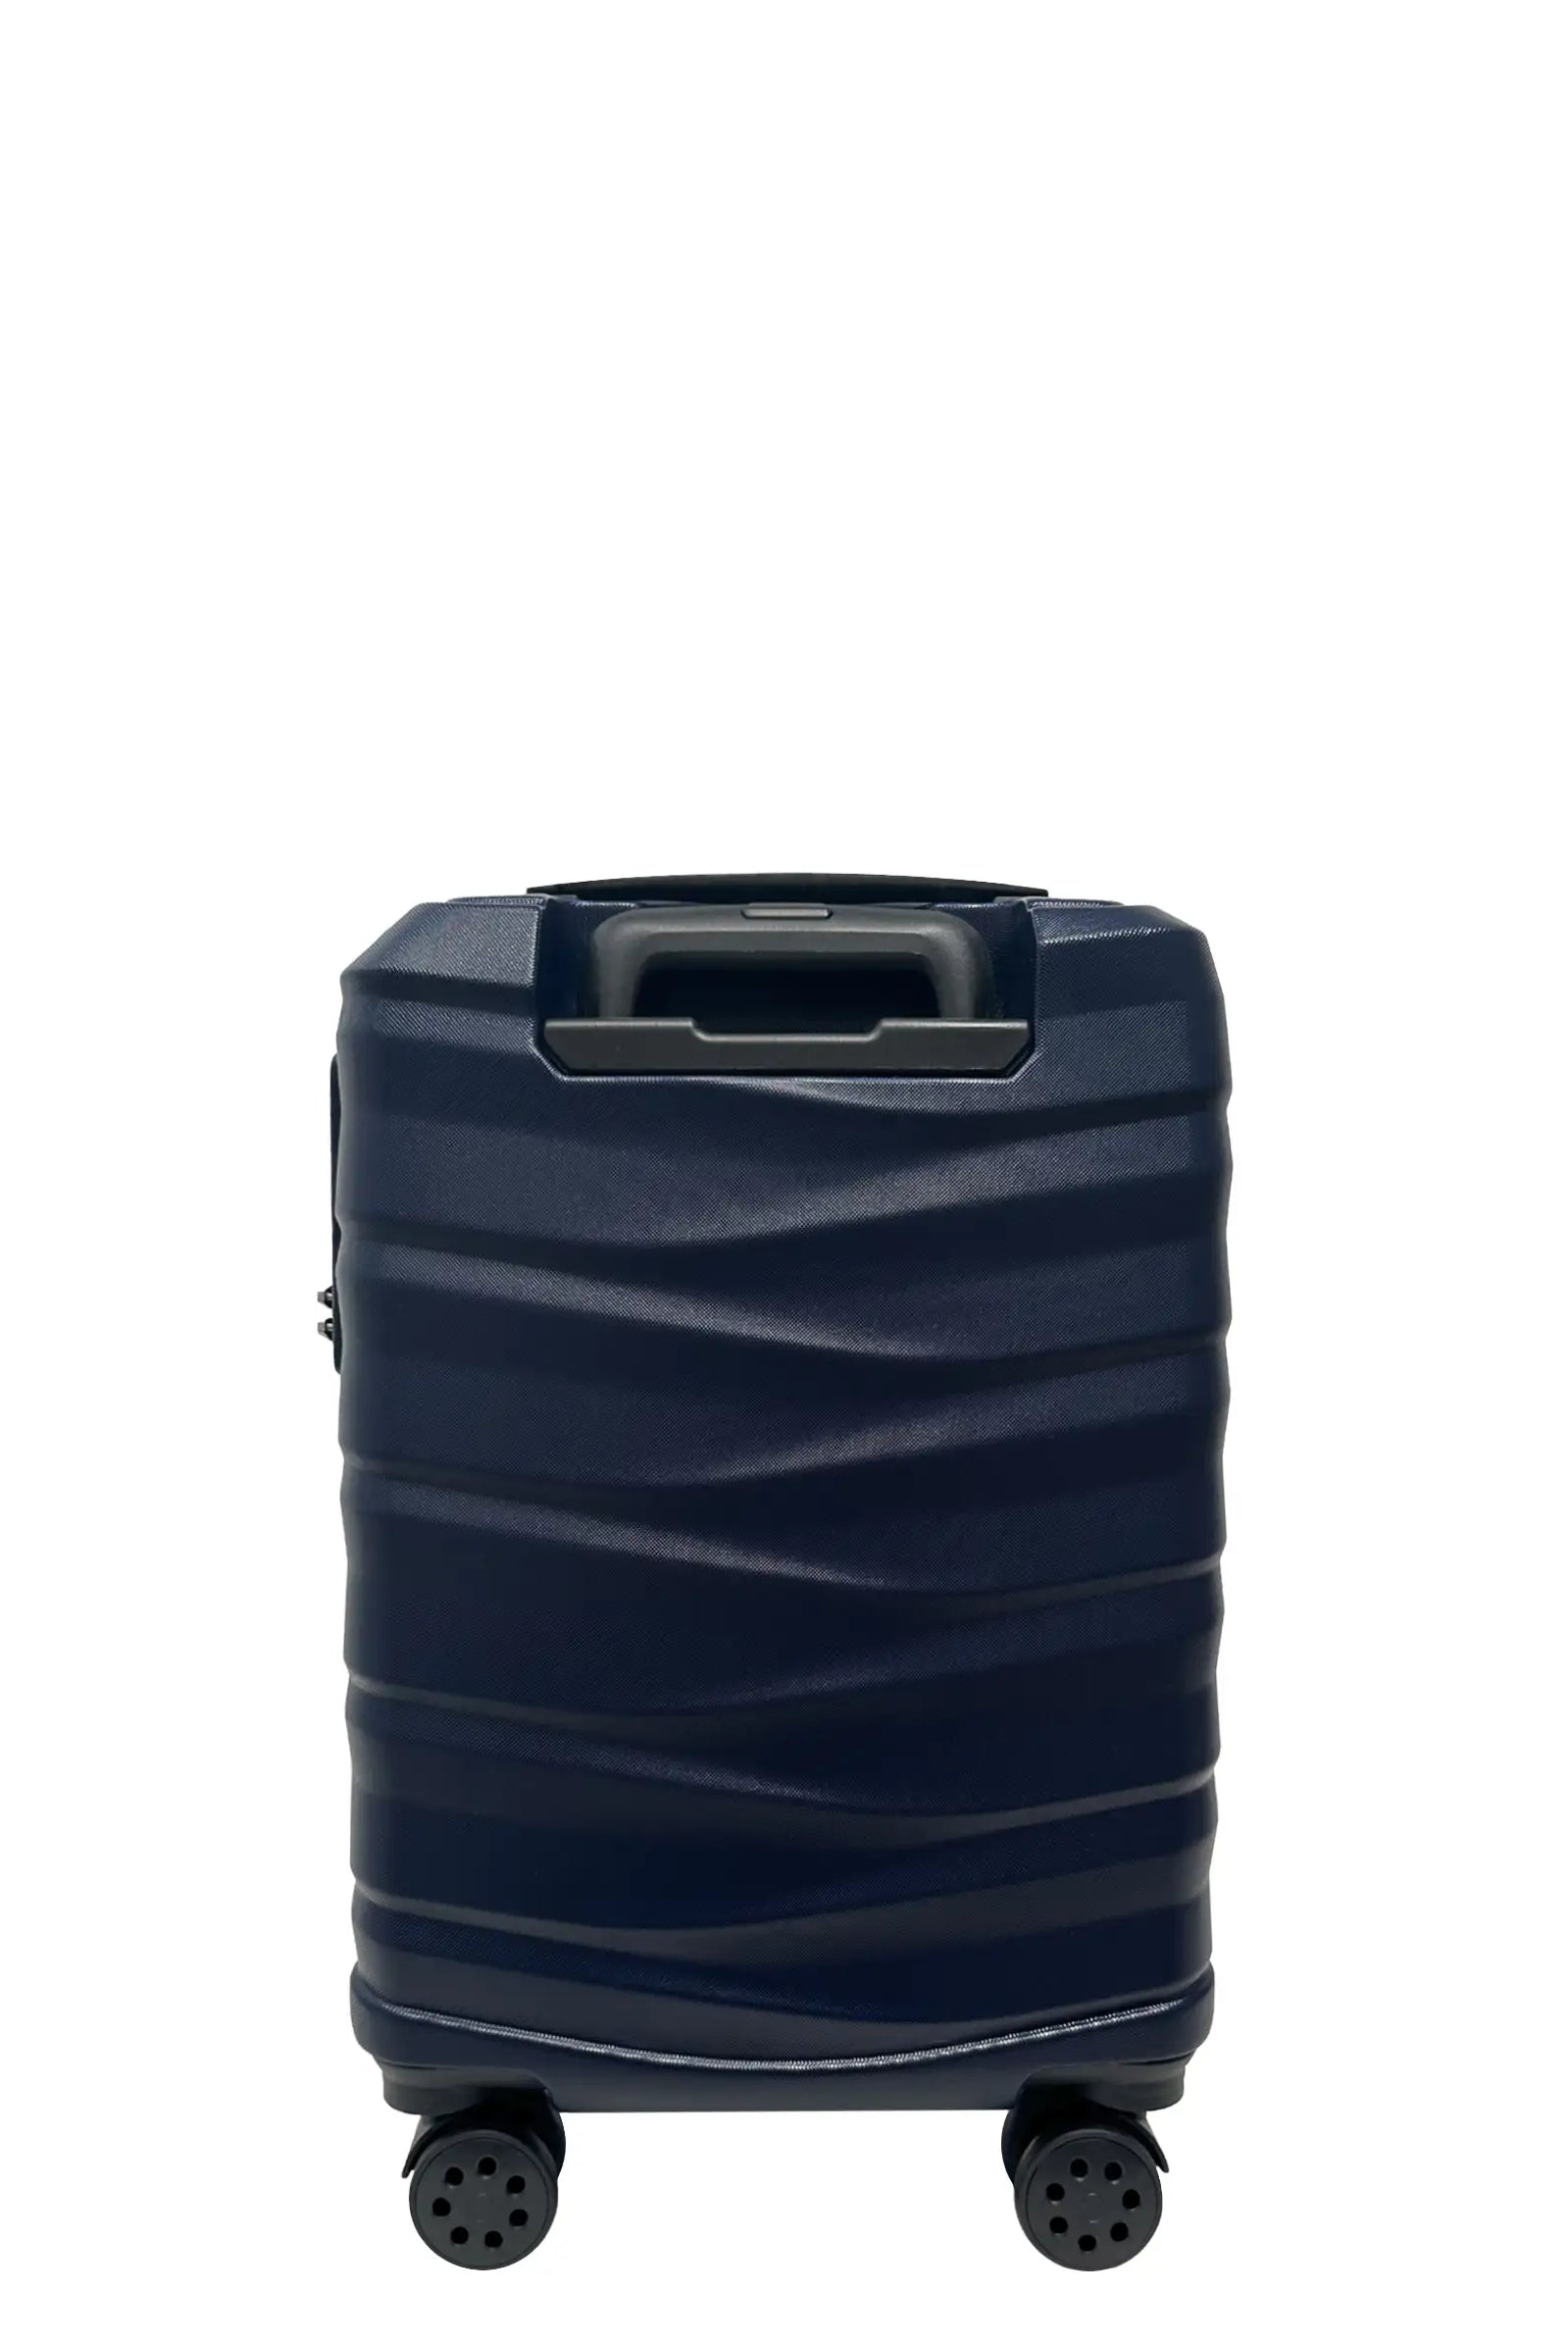 navy carry on suitcase